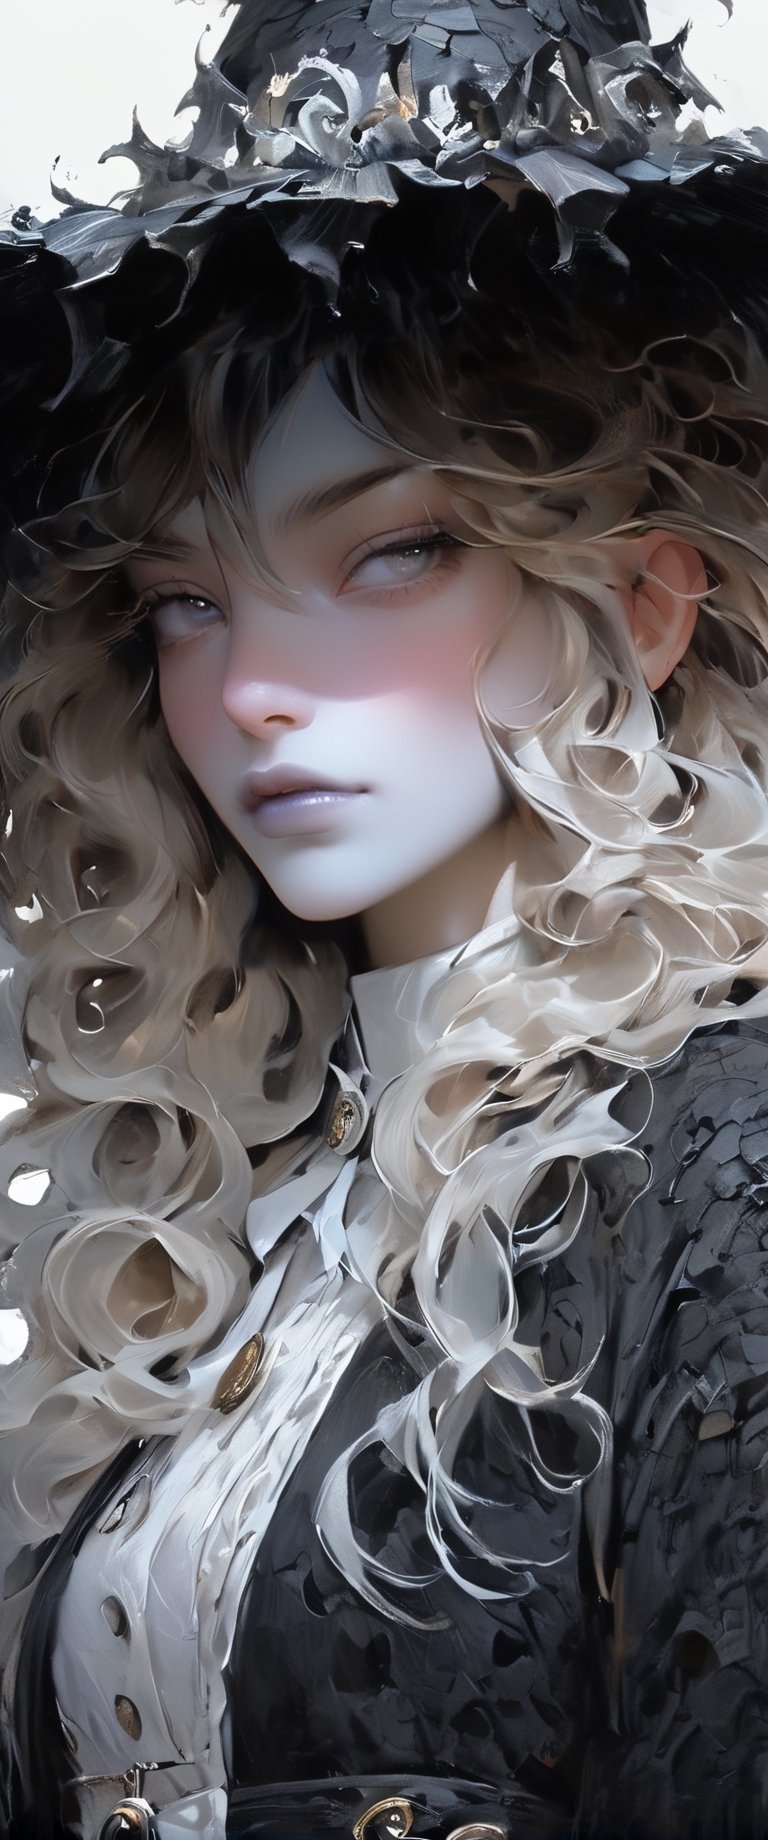 ((Add coprinus_comatus texture to her hat, witchhatshaped)), jagged edges, eye-catching detail, insanely intricate, vibrant light and shadow, beauty, textured, captivating, style of oil painting, modern ink, watercolor , brush strokes, negative white space,InkyCapWitchyHat,coprinus_comatus,ct-niji2,sooyaaa